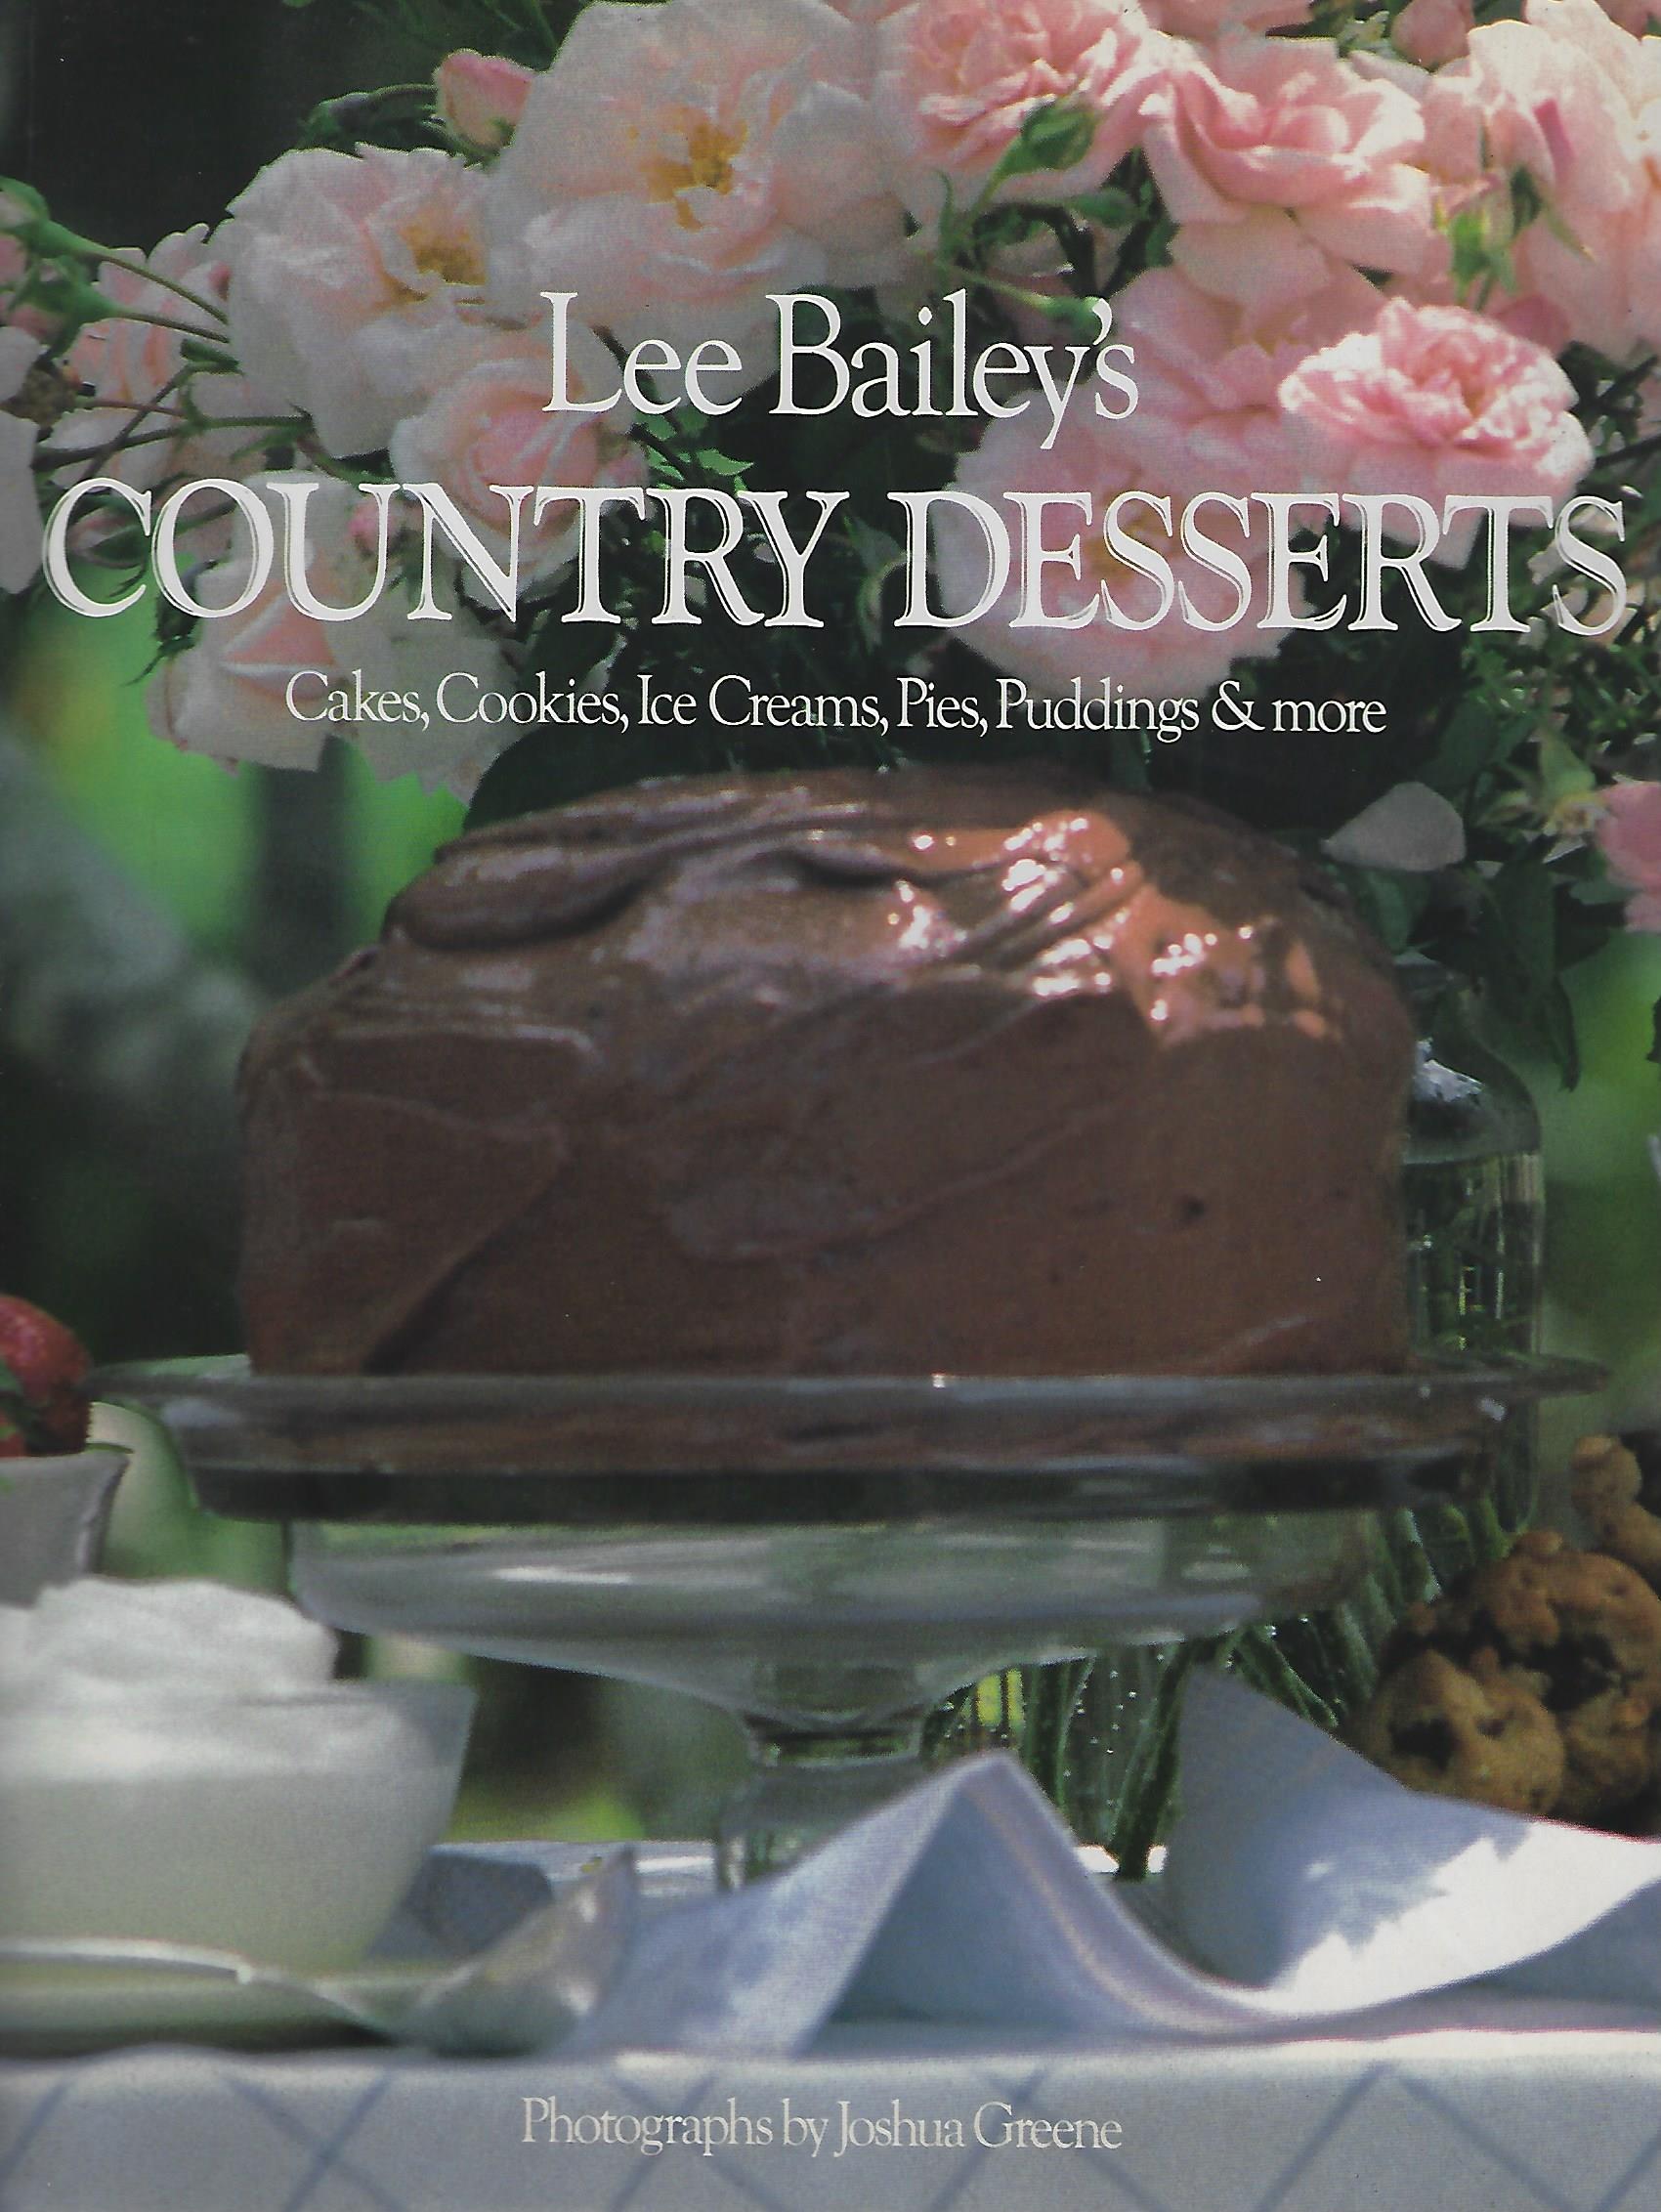 Image for Lee Bailey's Country Desserts - Cakes, cookies, ice creams, pies, puddings & more.